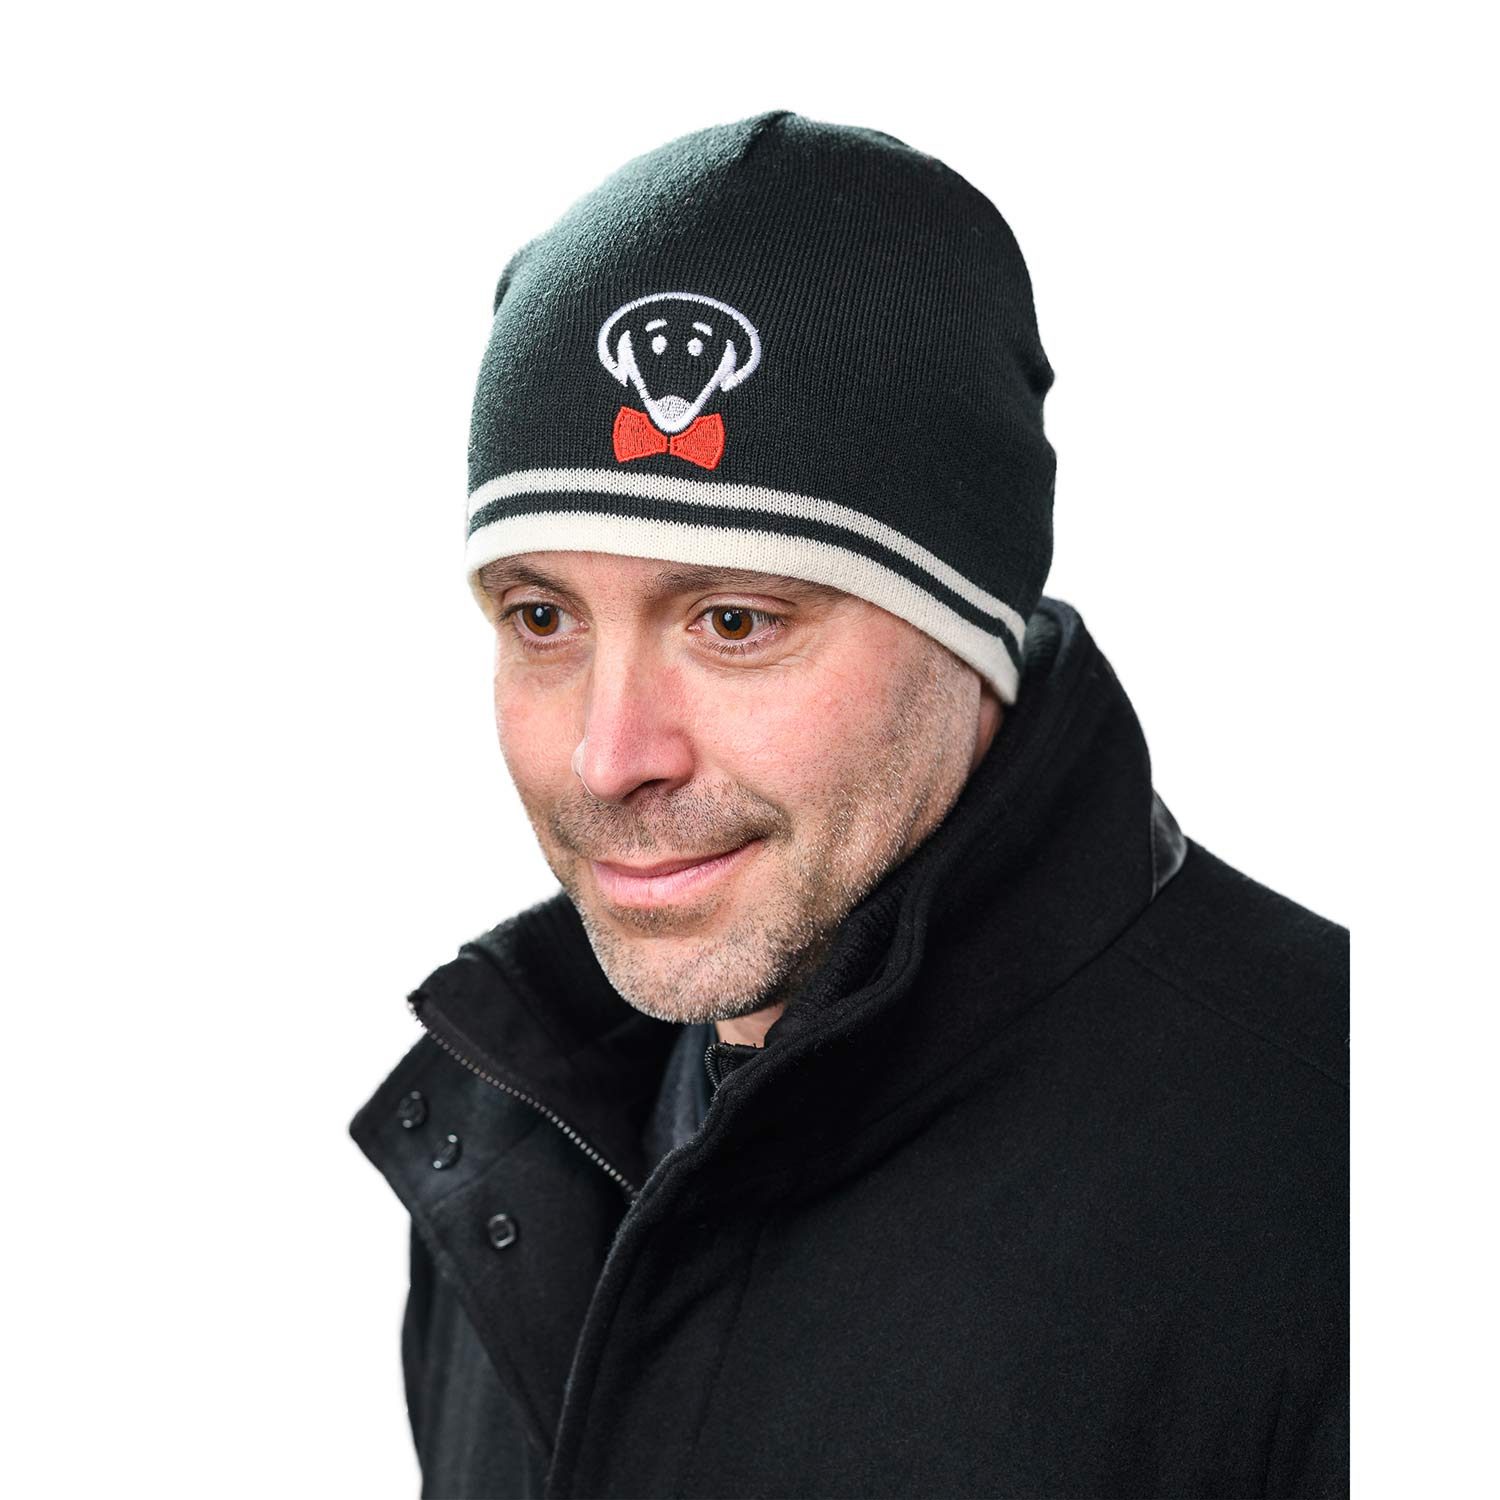 A classic winter look! - Signature knit hat by Beau Tyler